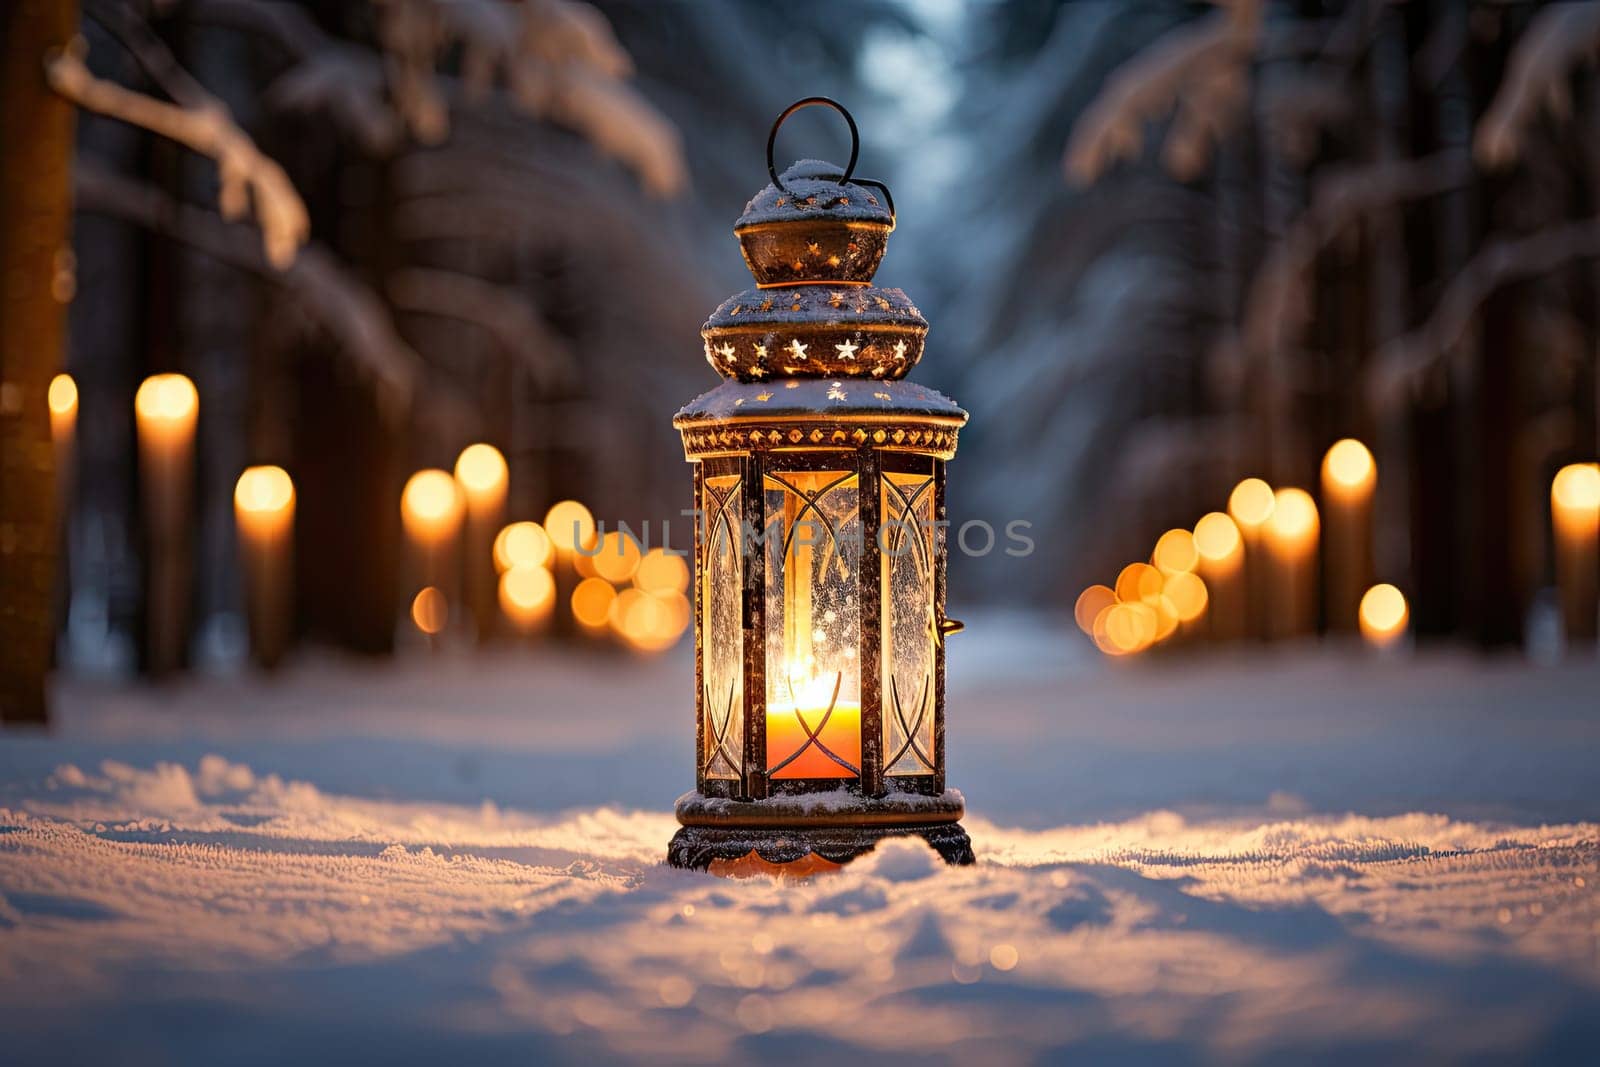 A lantern in the middle of a snowy path by golibtolibov